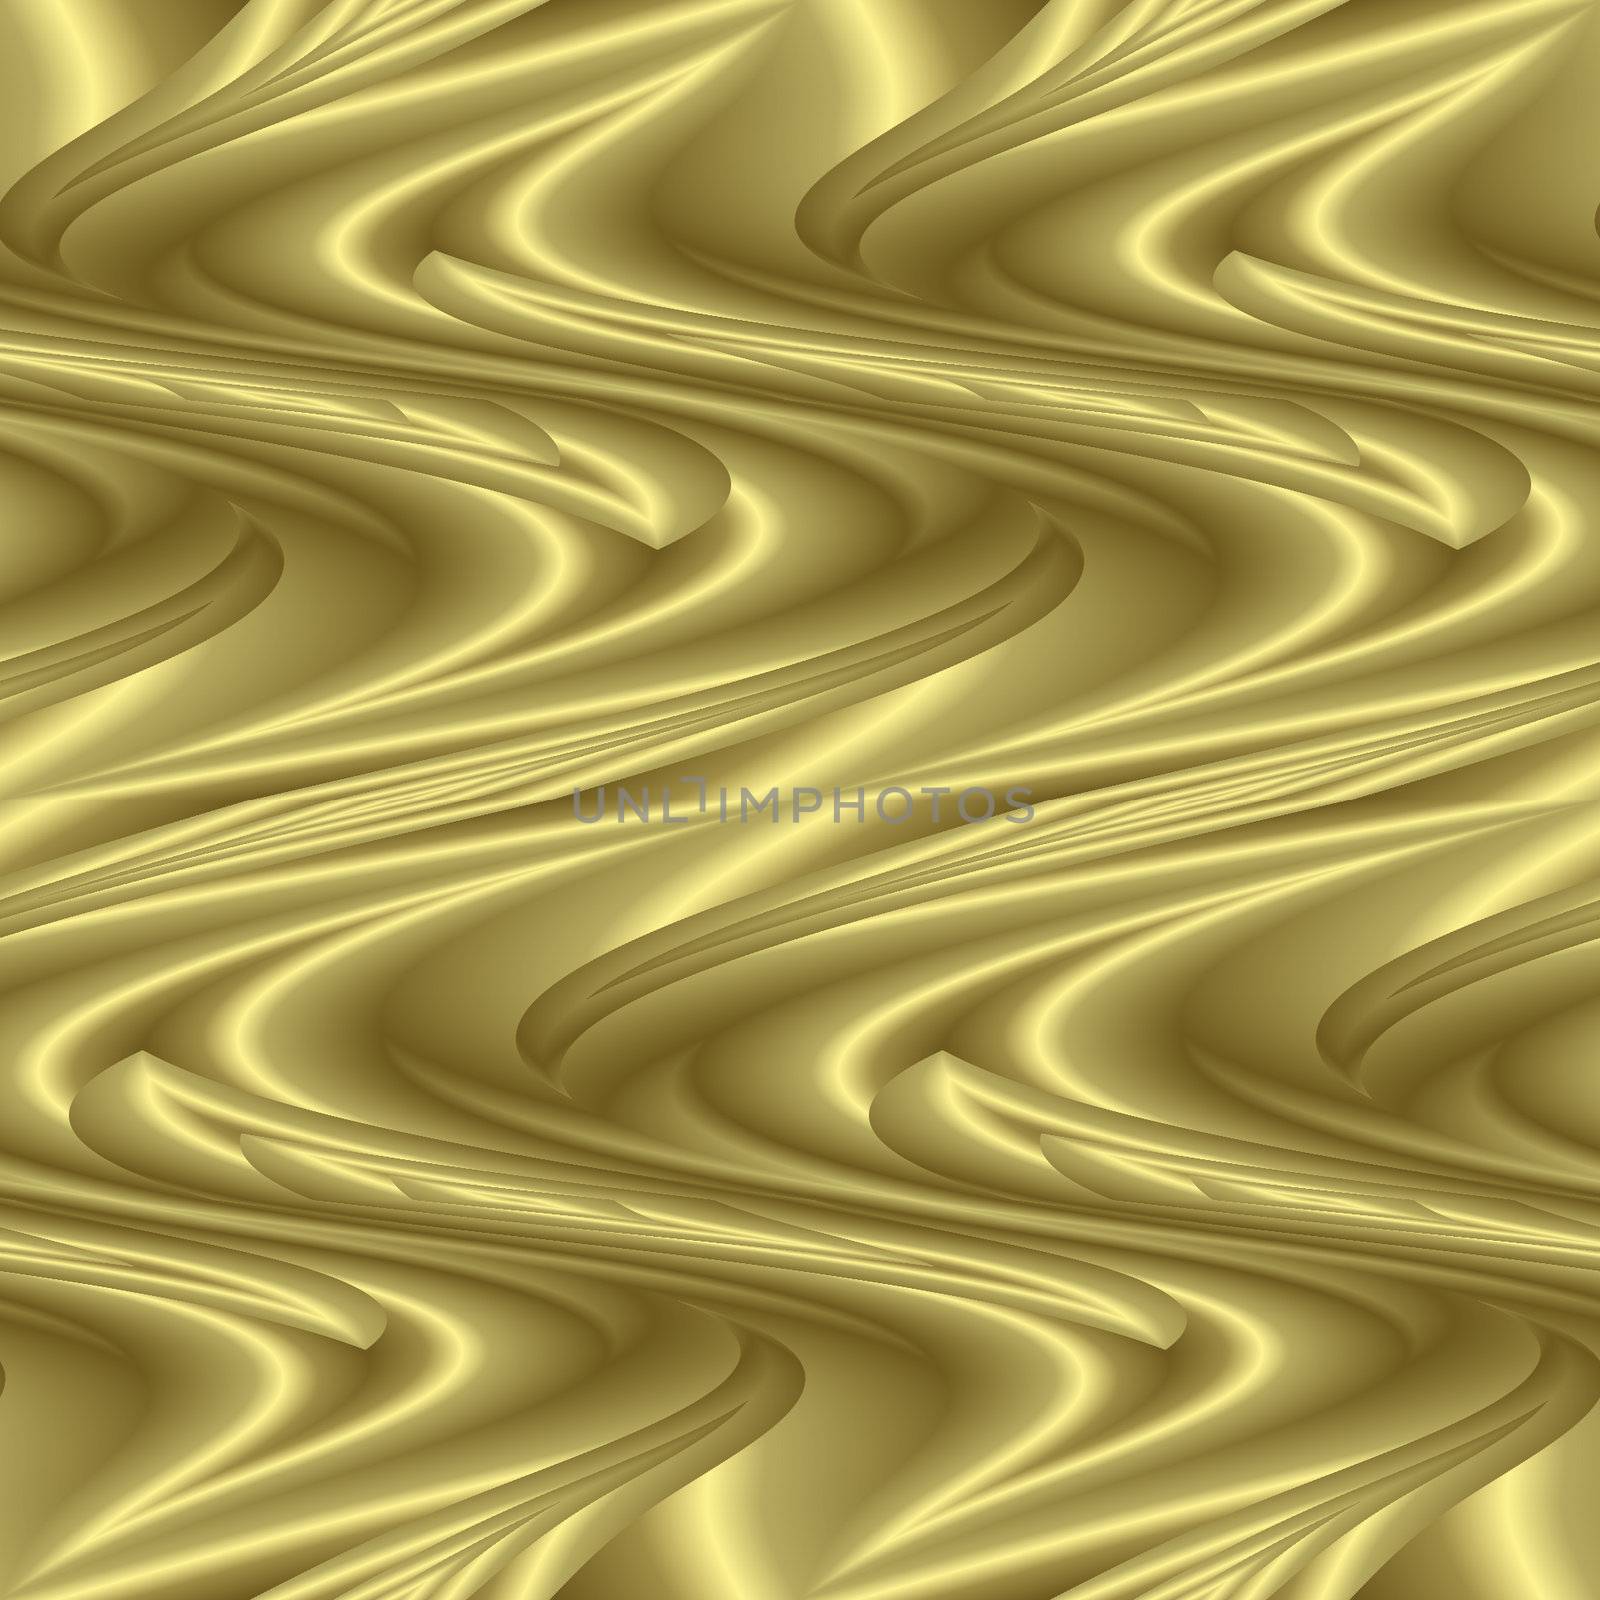 seamless tillable golden background texture with waves and swirls